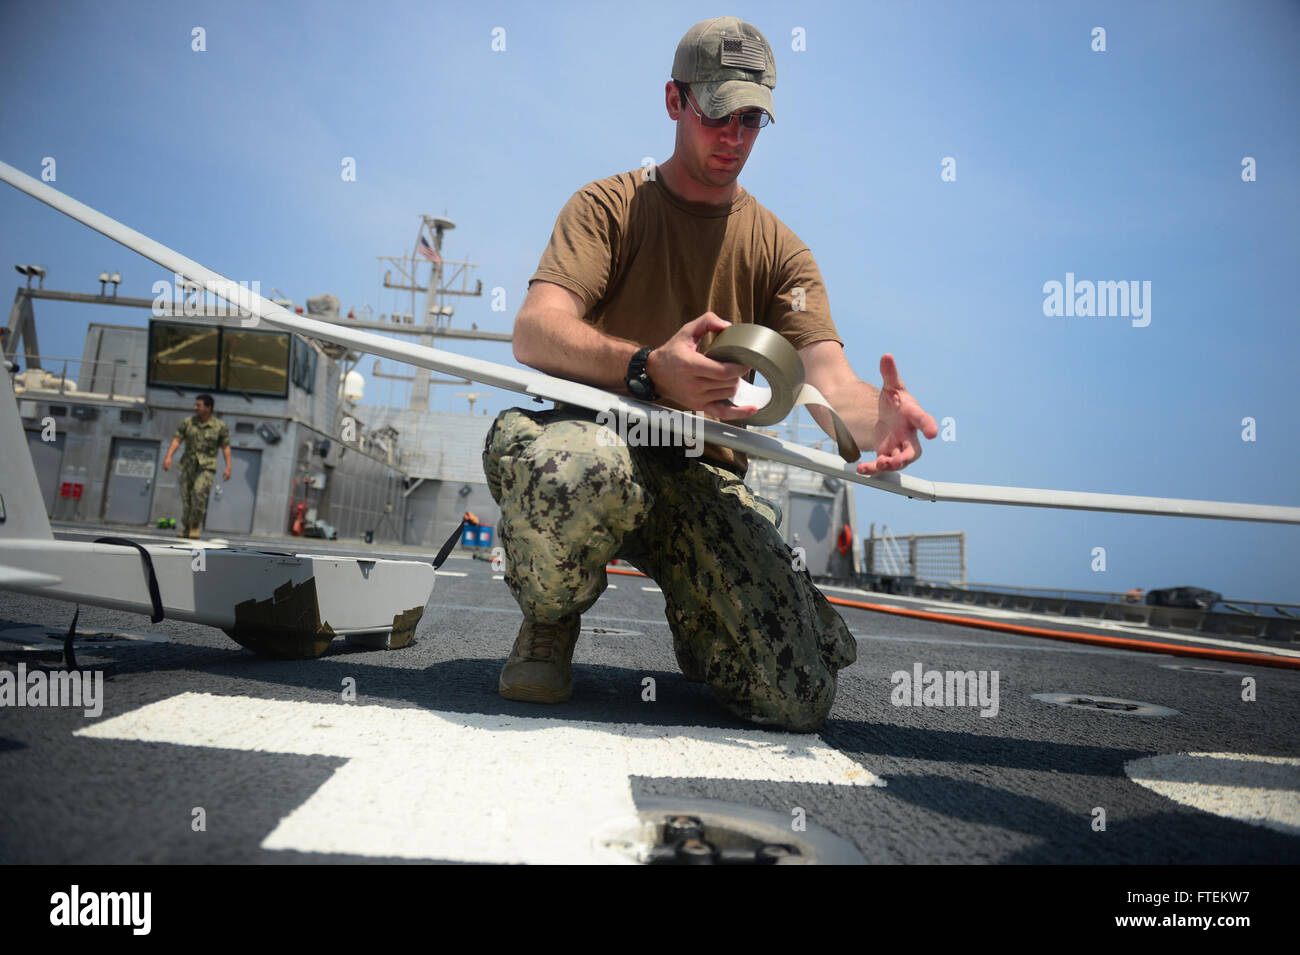 ATLANTIC OCEAN (Feb. 10, 2015) Information Technology Specialist 2nd Class Joshua Lesperance, from Spring Valley, Illinois, conducts routine maintenance on the RQ-20A  Aqua Puma small unmanned aircraft system aboard the Military Sealift Command's joint high-speed vessel USNS Spearhead (JHSV 1) Feb. 10, 2015. Spearhead is on a scheduled deployment to the U.S. 6th Fleet area of operations in support of the international collaborative capacity-building program Africa Partnership Station (APS). (U.S. Navy photo by Mass Communication Specialist 1st Class Joshua Davies/Released) Stock Photo